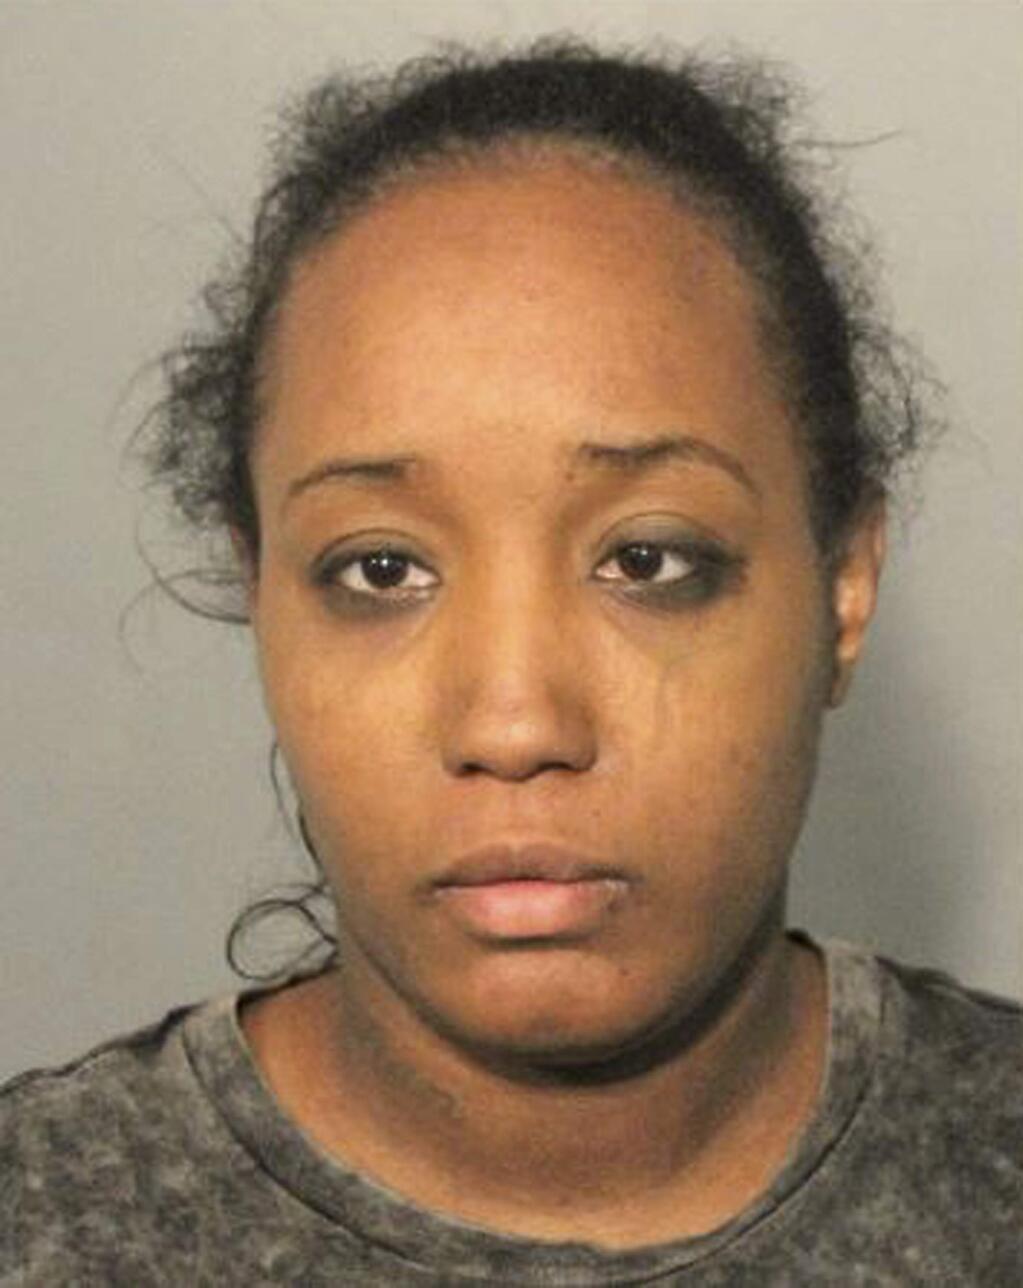 This booking mug released Monday, May 14, 2018, by the Solano County Sheriff's Office shows Ina Rogers. Police said Monday they had removed 10 children from a squalid California home and charged their father with torture and their mother with neglect after an investigation revealed a lengthy period of severe physical and emotional abuse. The children range from 4 months to 12 years old, said Fairfield police Lt. Greg Hurlbut. The father, Jonathan Allen, 29, faces felony charges of torture and child abuse and the 30-year-old mother Ina Rogers faces child neglect charges. She was arrested March 31 and released after posting $10,000 bail. (Solano County Sheriff's Office via AP)